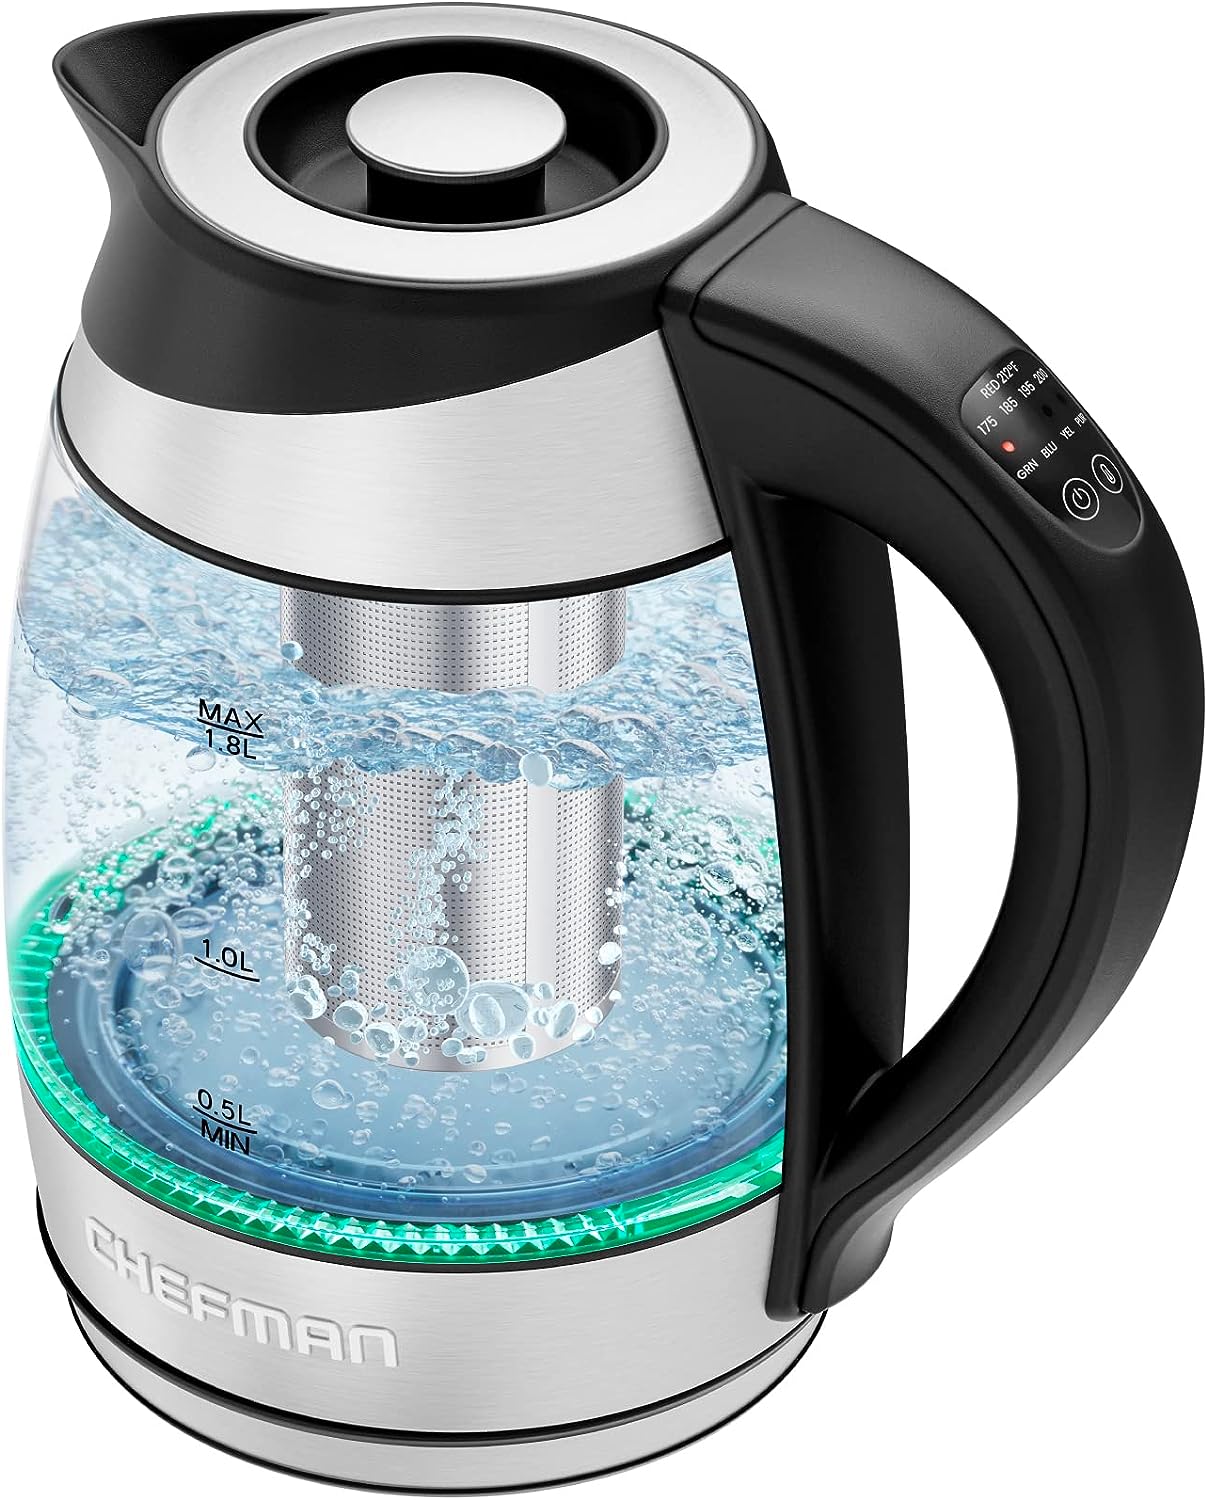 Chefman Electric Kettle with Temperature Control, 5 Presets LED Indicator Lights, Removable Tea Infuser, Glass Tea Kettle  Hot Water Boiler, 360° Swivel Base, BPA Free, Stainless Steel, 1.8 Liters